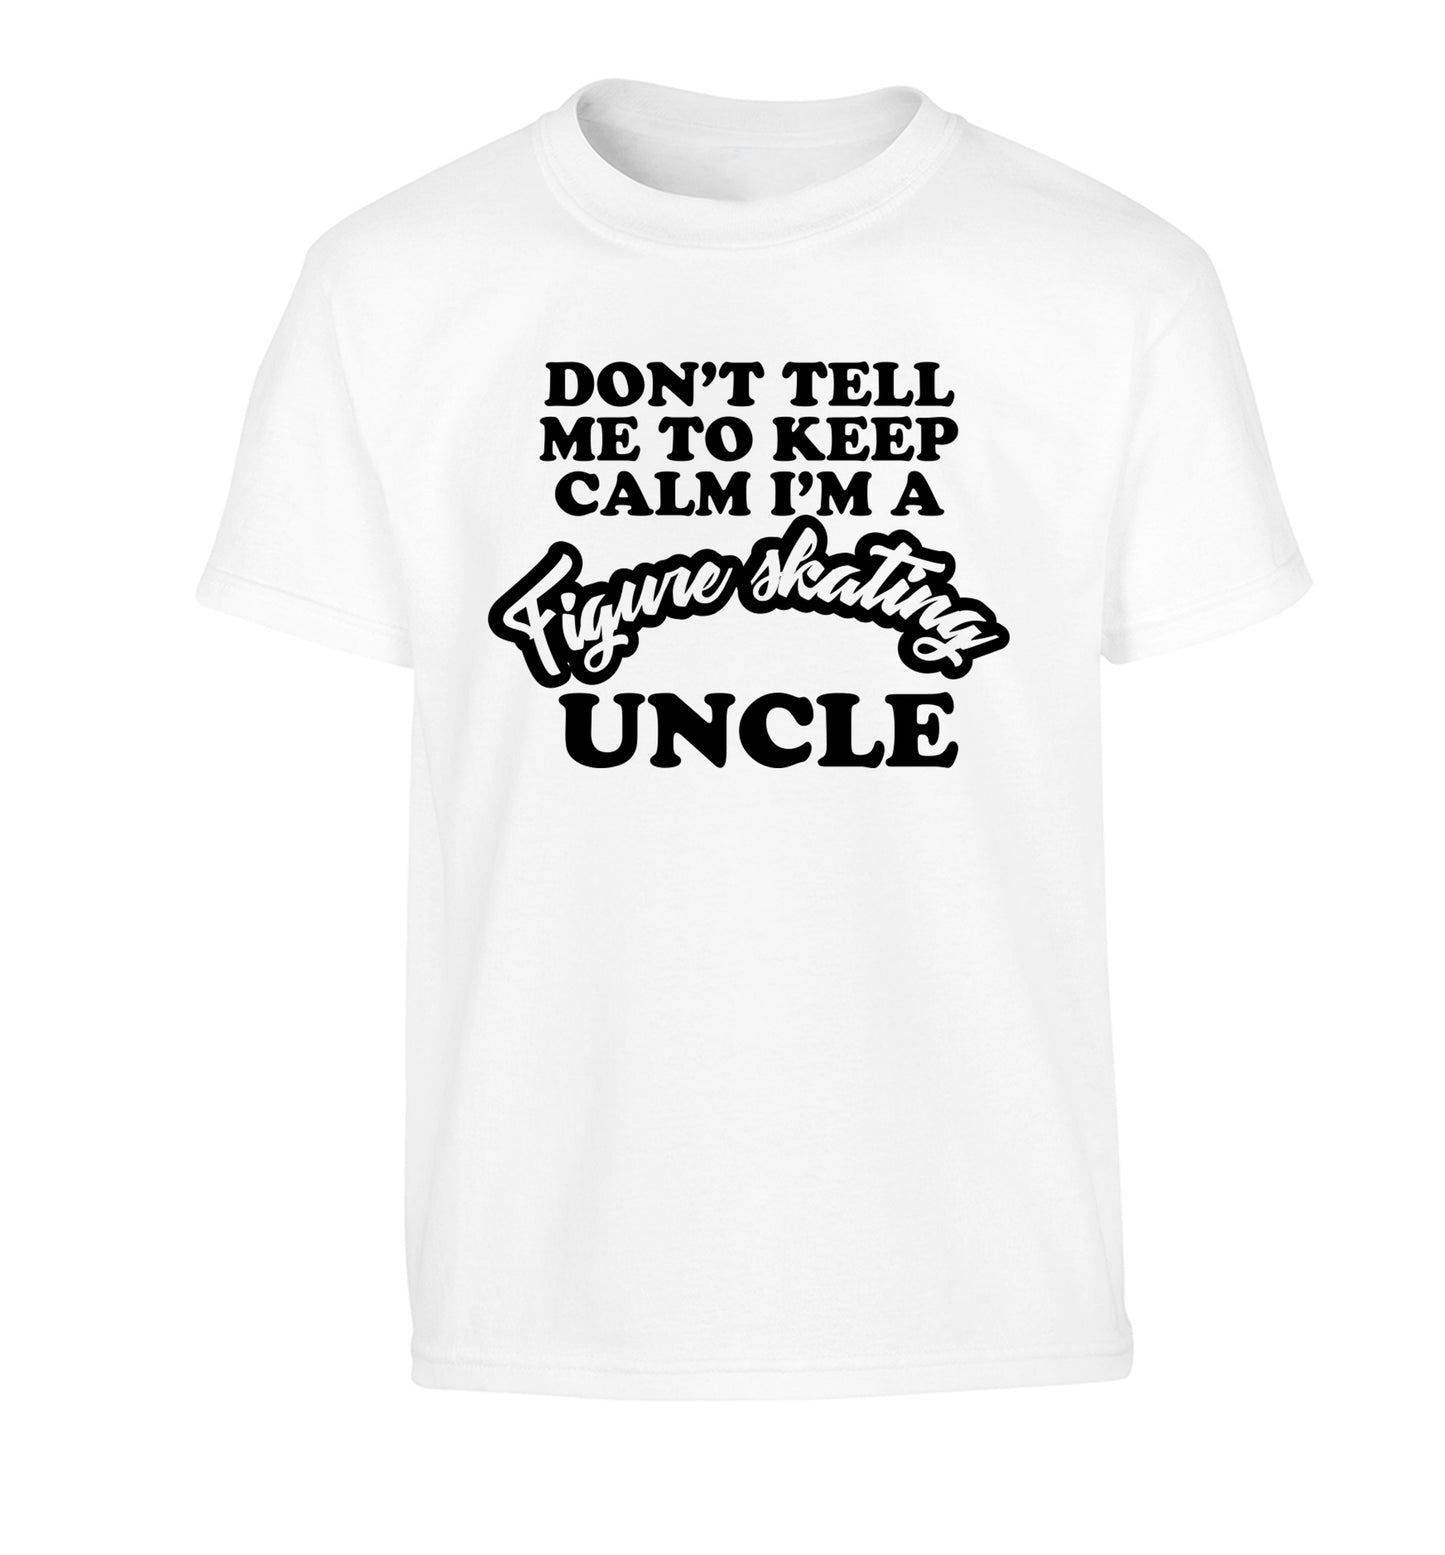 Don't tell me to keep calm I'm a figure skating uncle Children's white Tshirt 12-14 Years